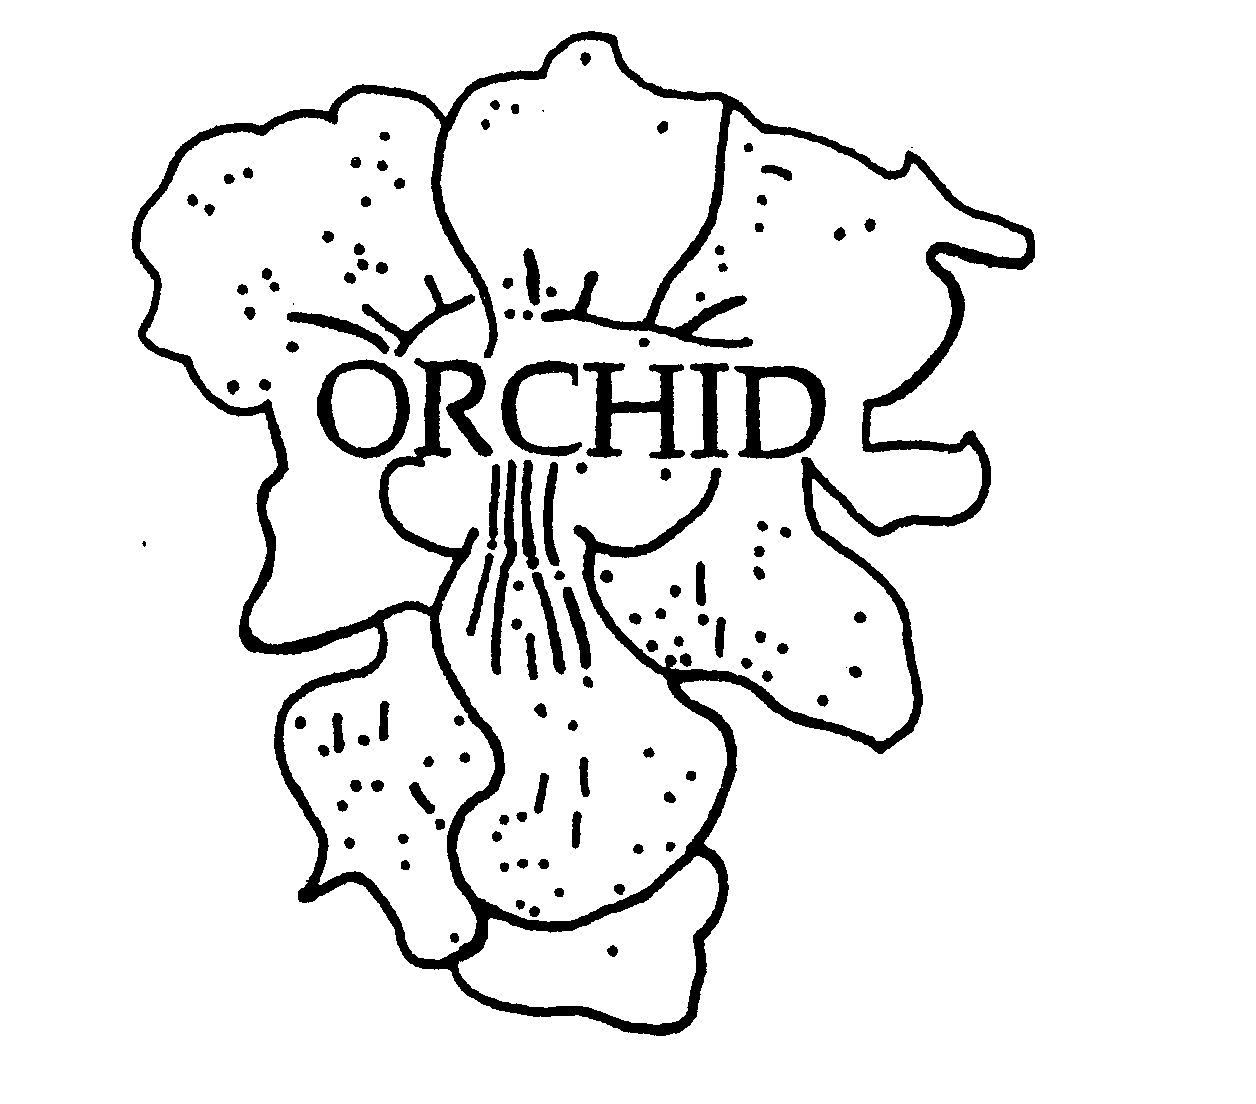  ORCHID